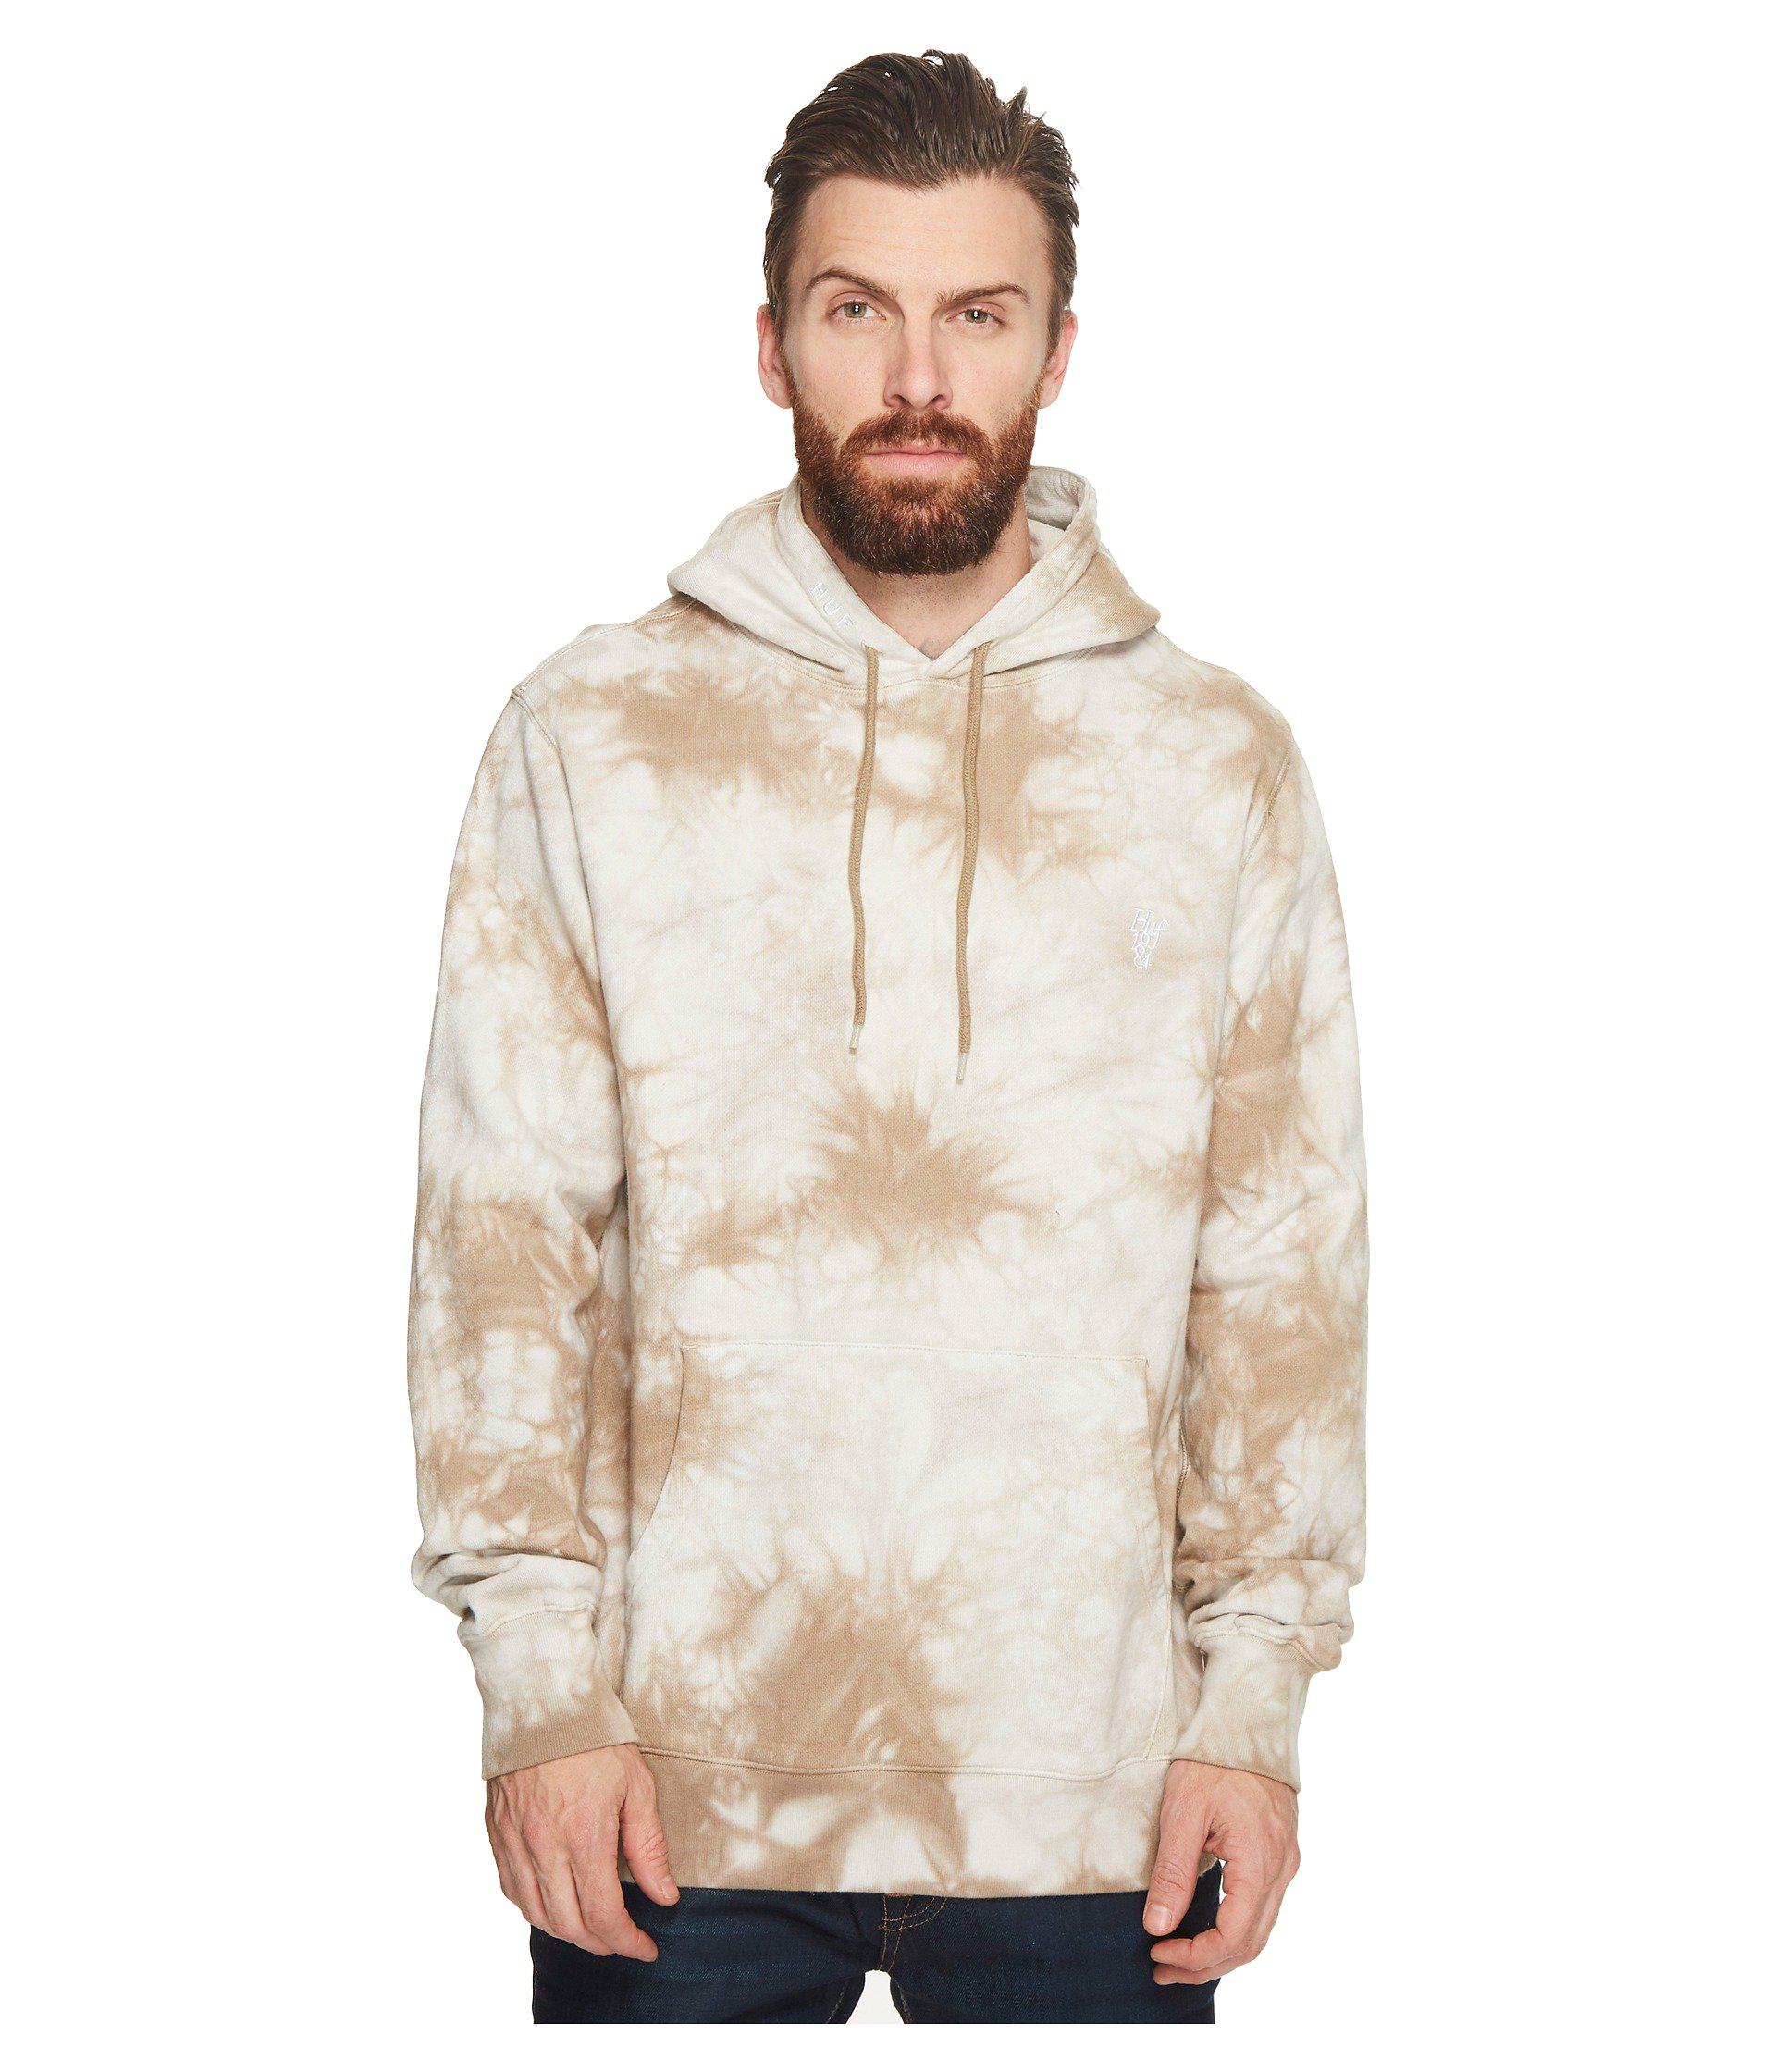 Huf Cotton Leary Tie-dye Pullover Hoodie in Beige (Natural) for Men - Lyst